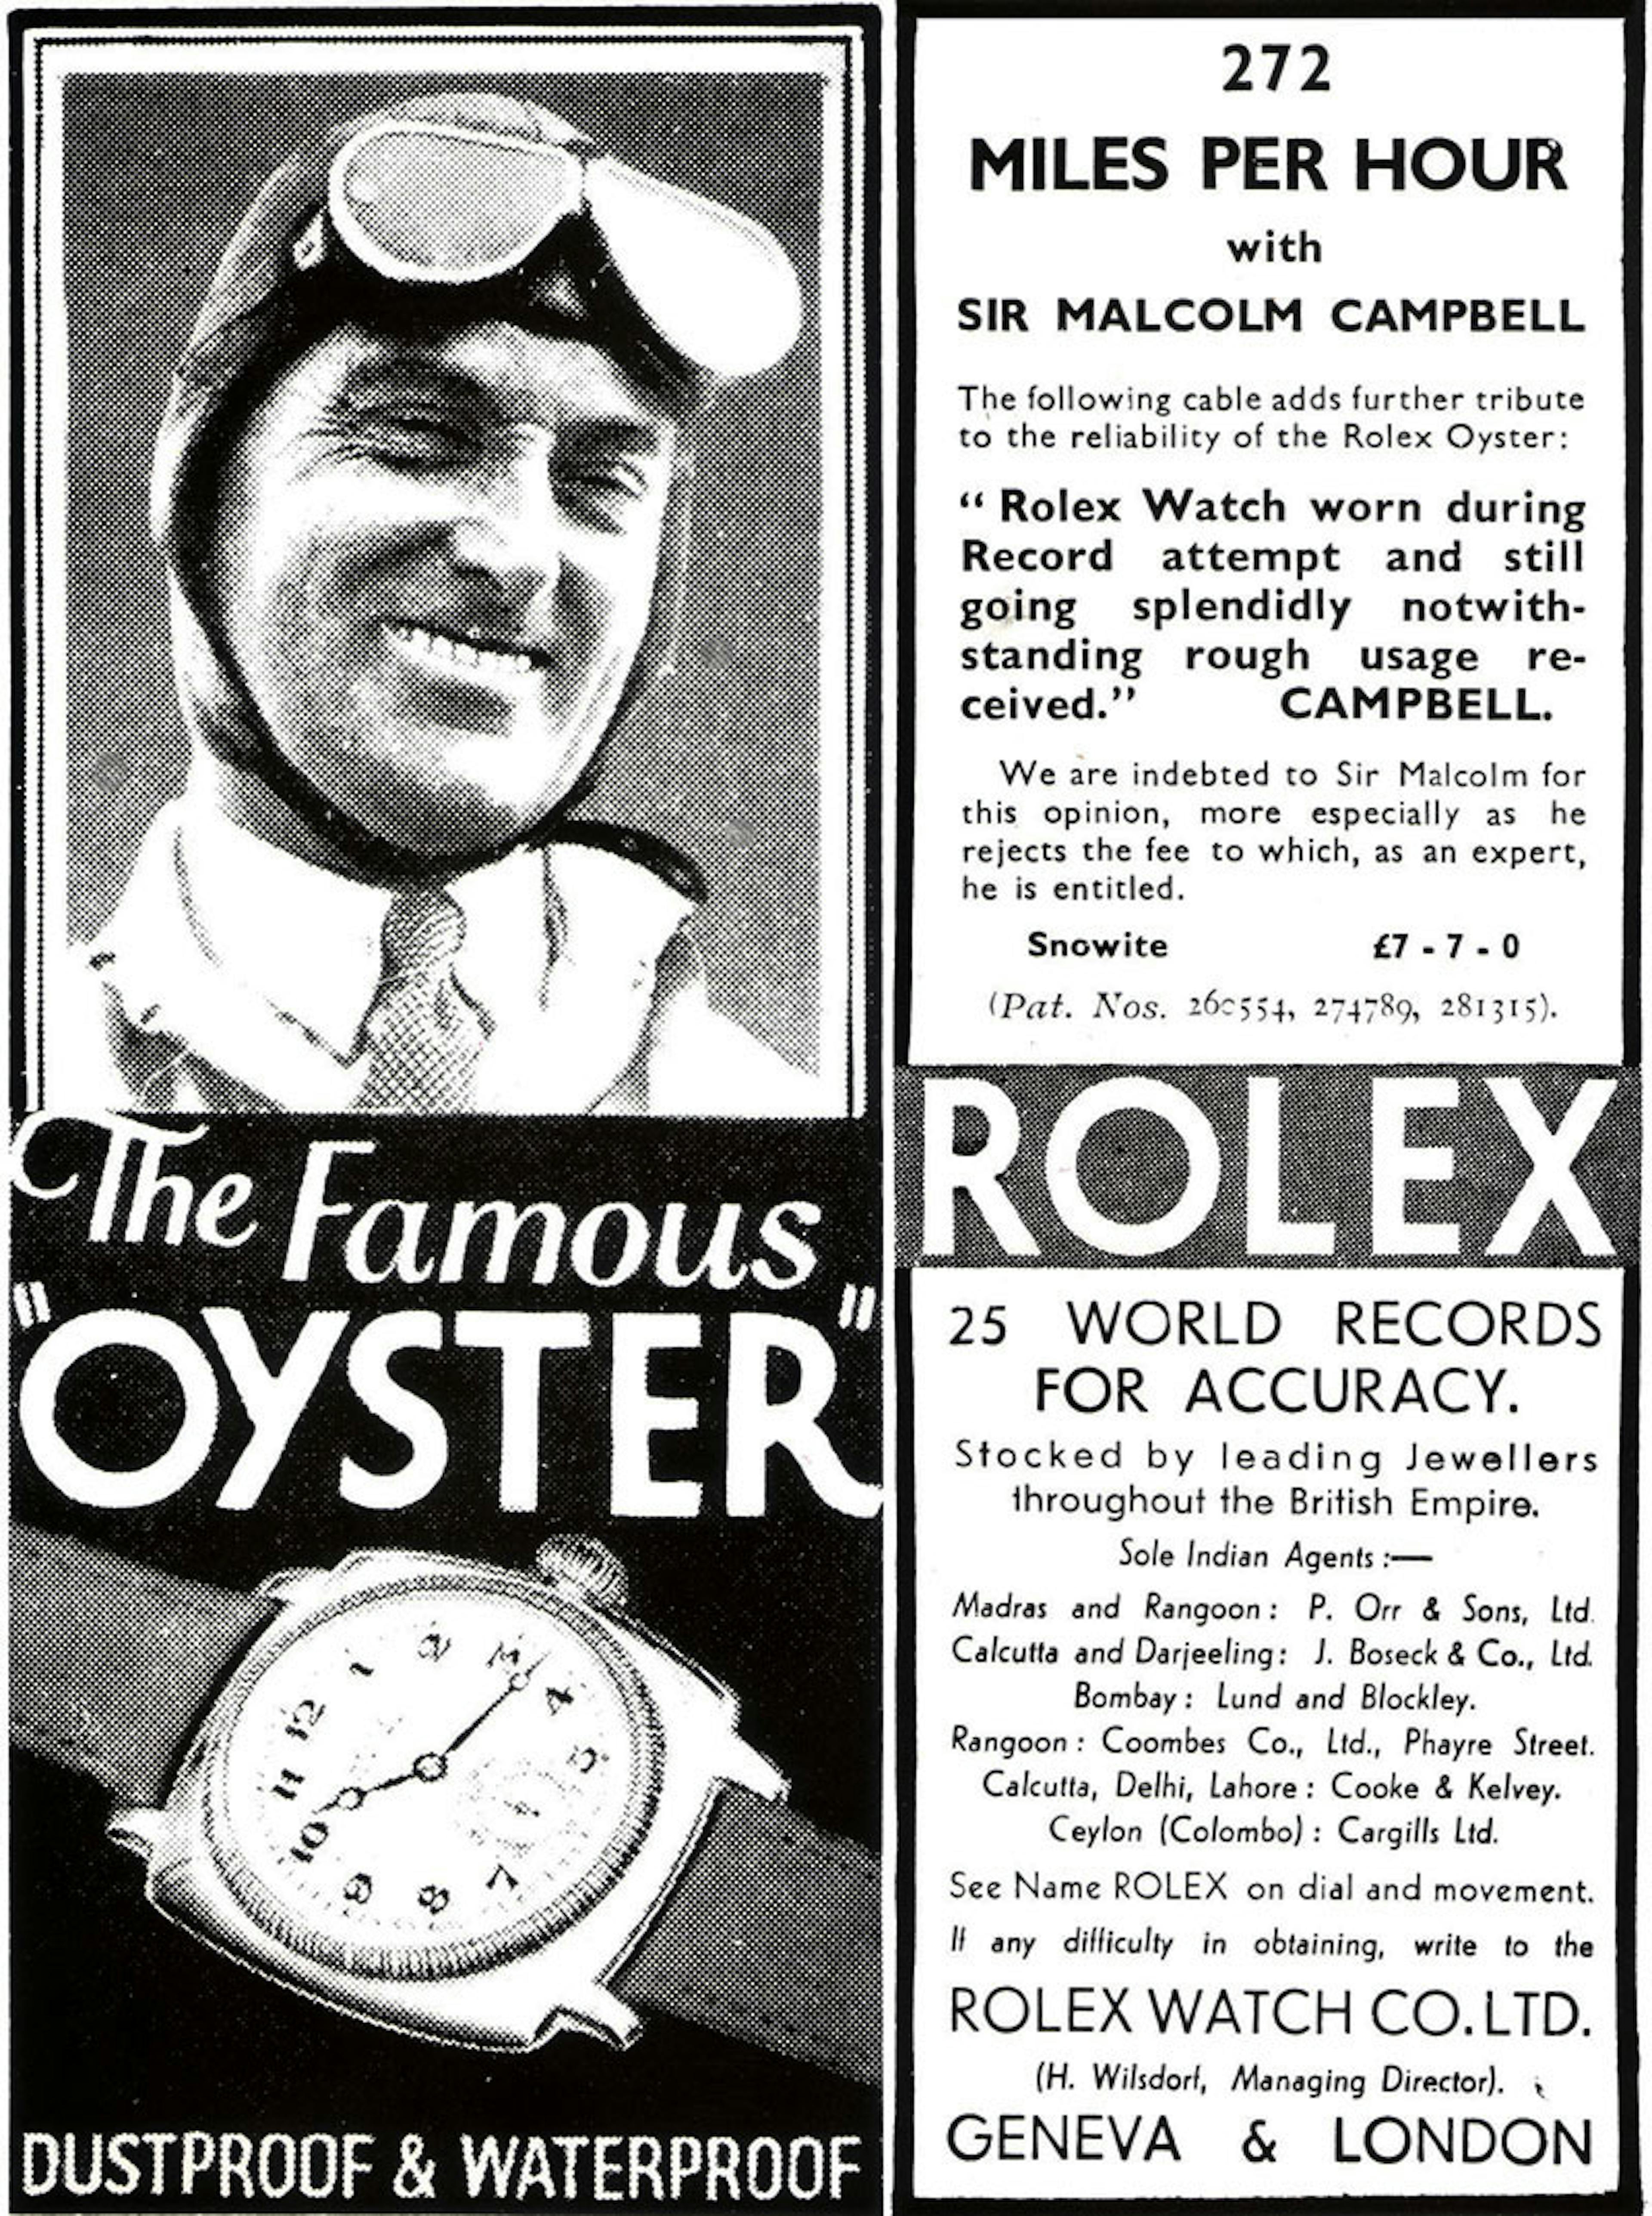 Malcolm Campbell in a Rolex Ad. He was one of the first watch world celebrity influencers. Image courtesy of Jake's Rolex World: www.rolexmagazine.com